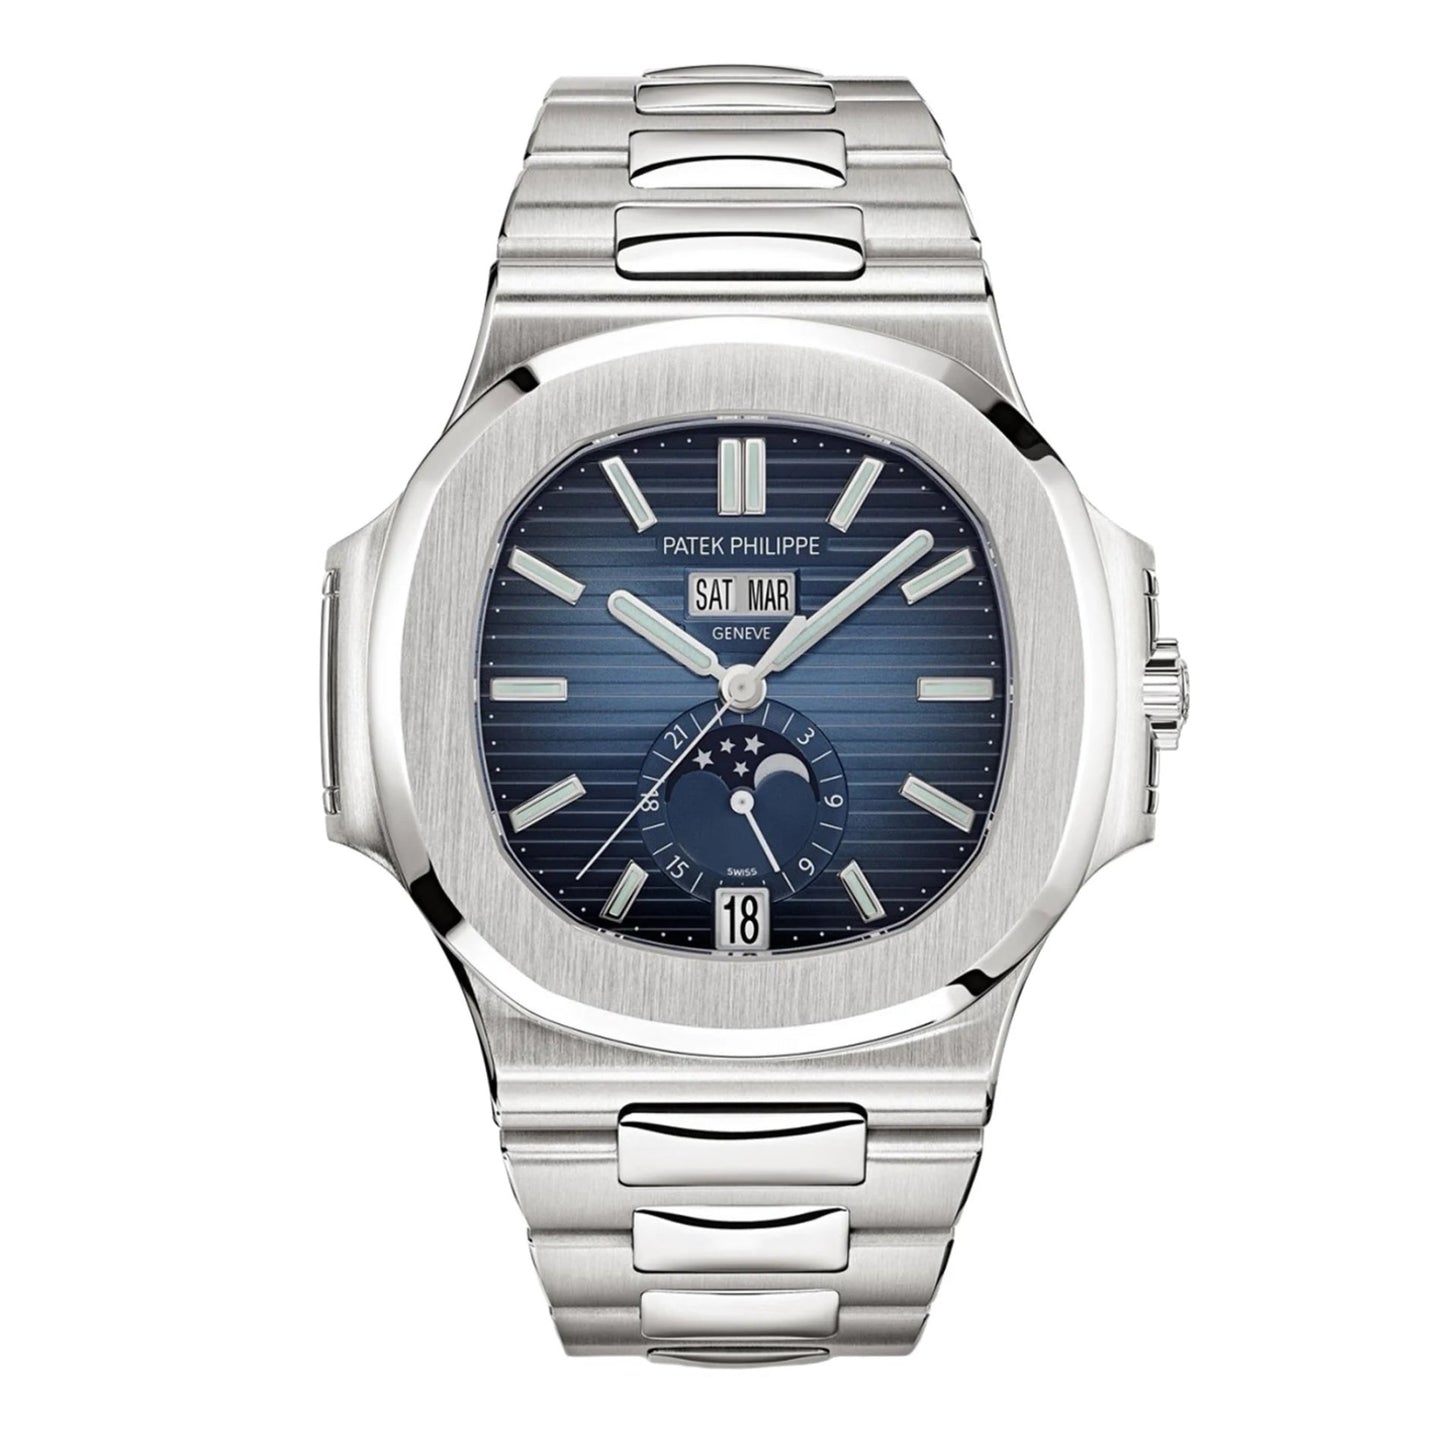 Patek Philippe Nautilus Annual Calendar Stainless Steel with Blue Dial/ Moon Phase (Ref#5726/1A-014)